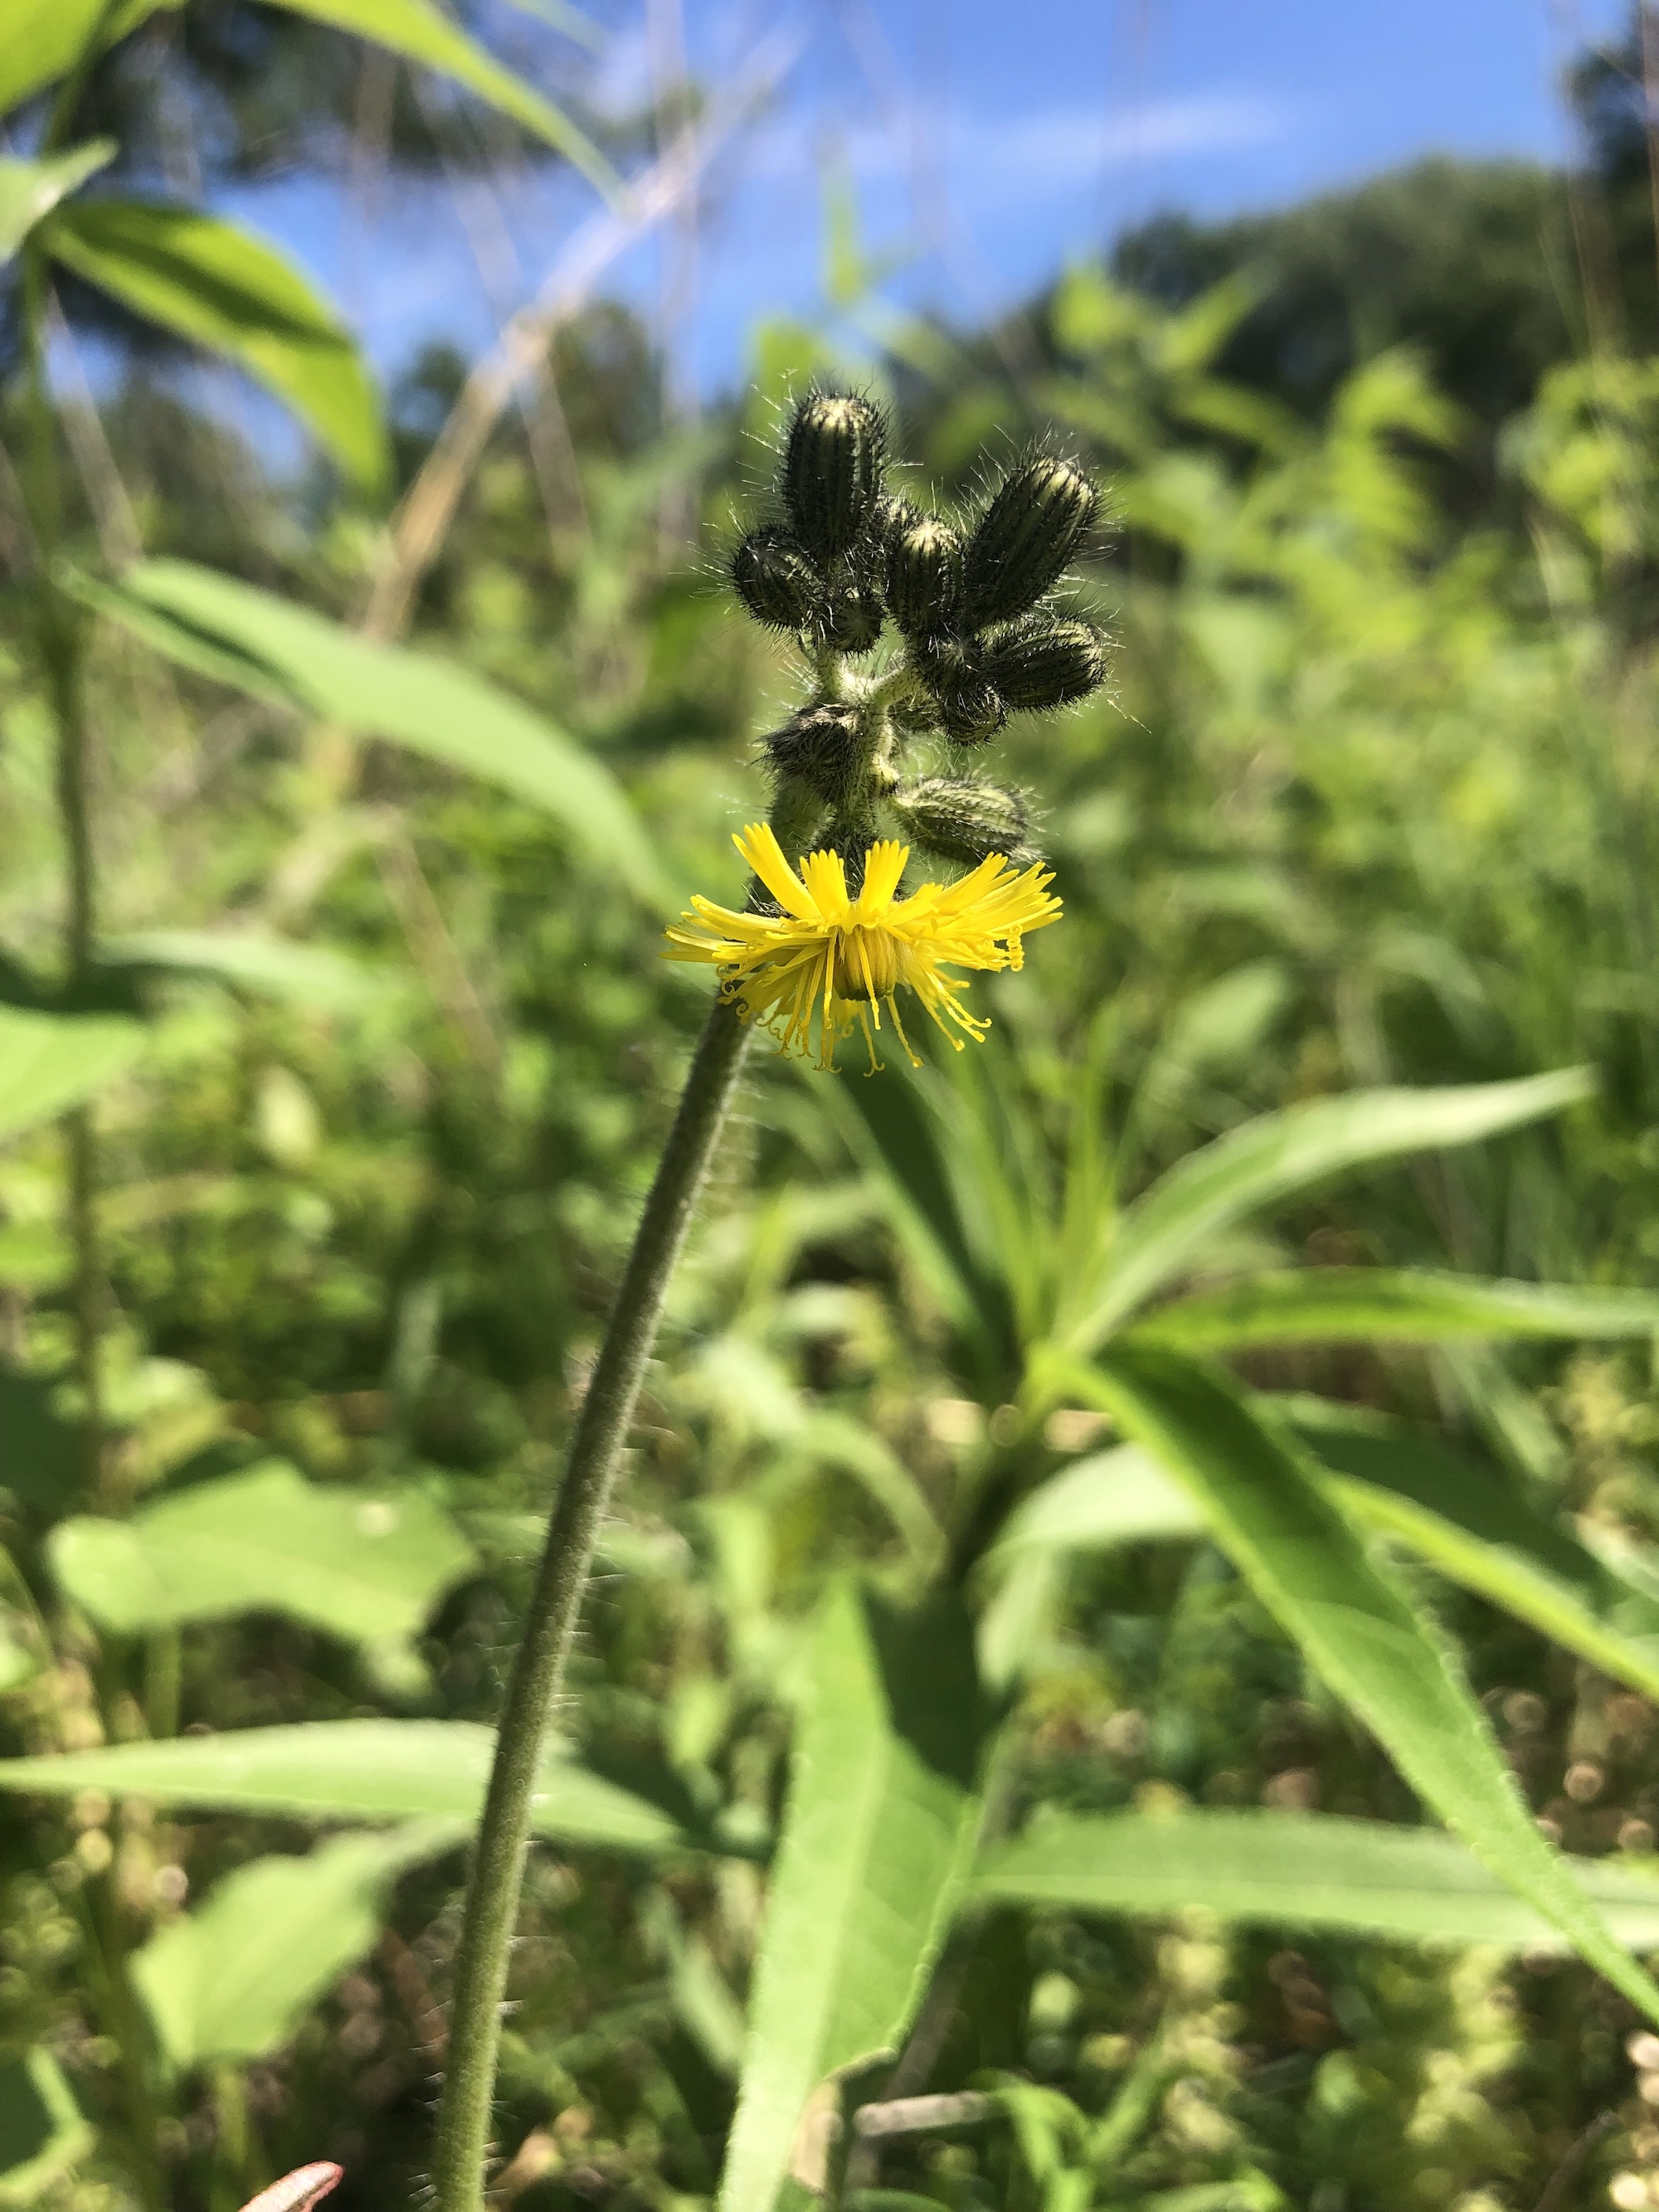 Meadow Hawkweed leaves and stem in the Curtis Prairie in the University of Wisconsin-Madison Arboretum in Madison, Wisconsin on June 9, 2022.